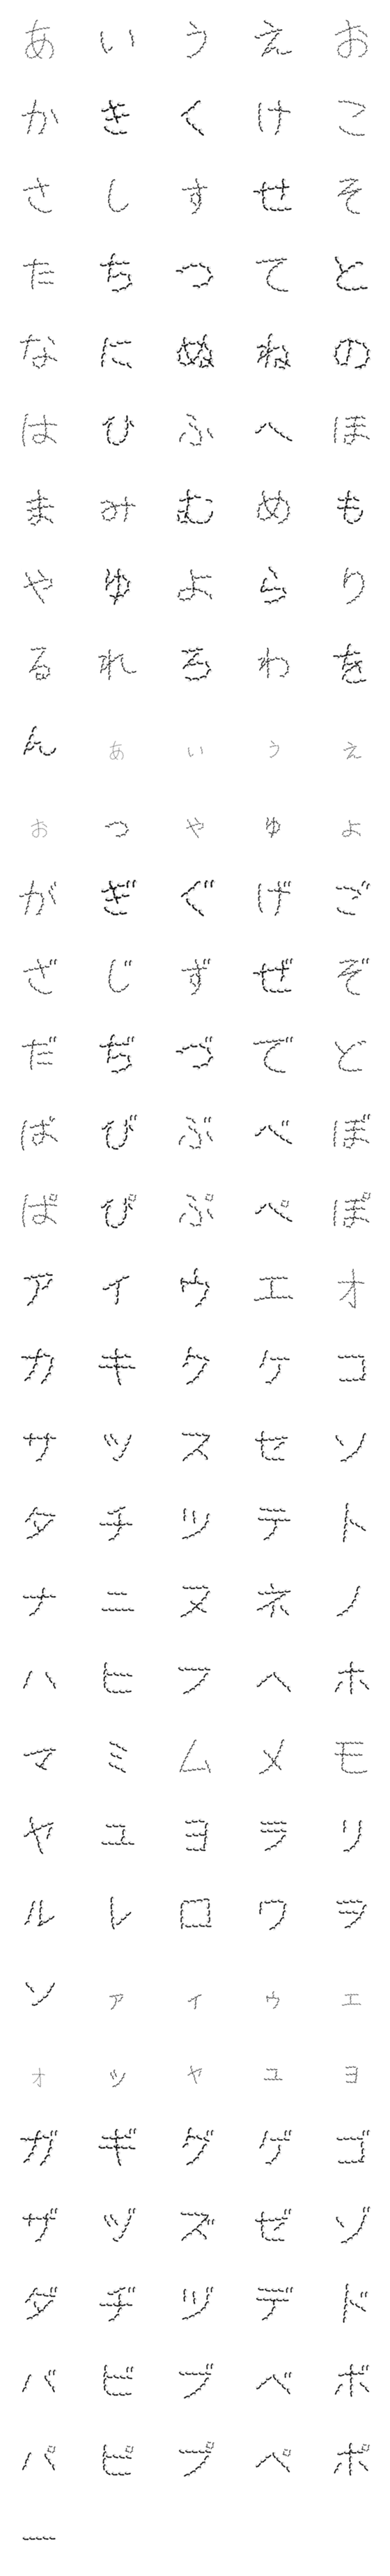 [LINE絵文字]蟻文字 フォントの画像一覧